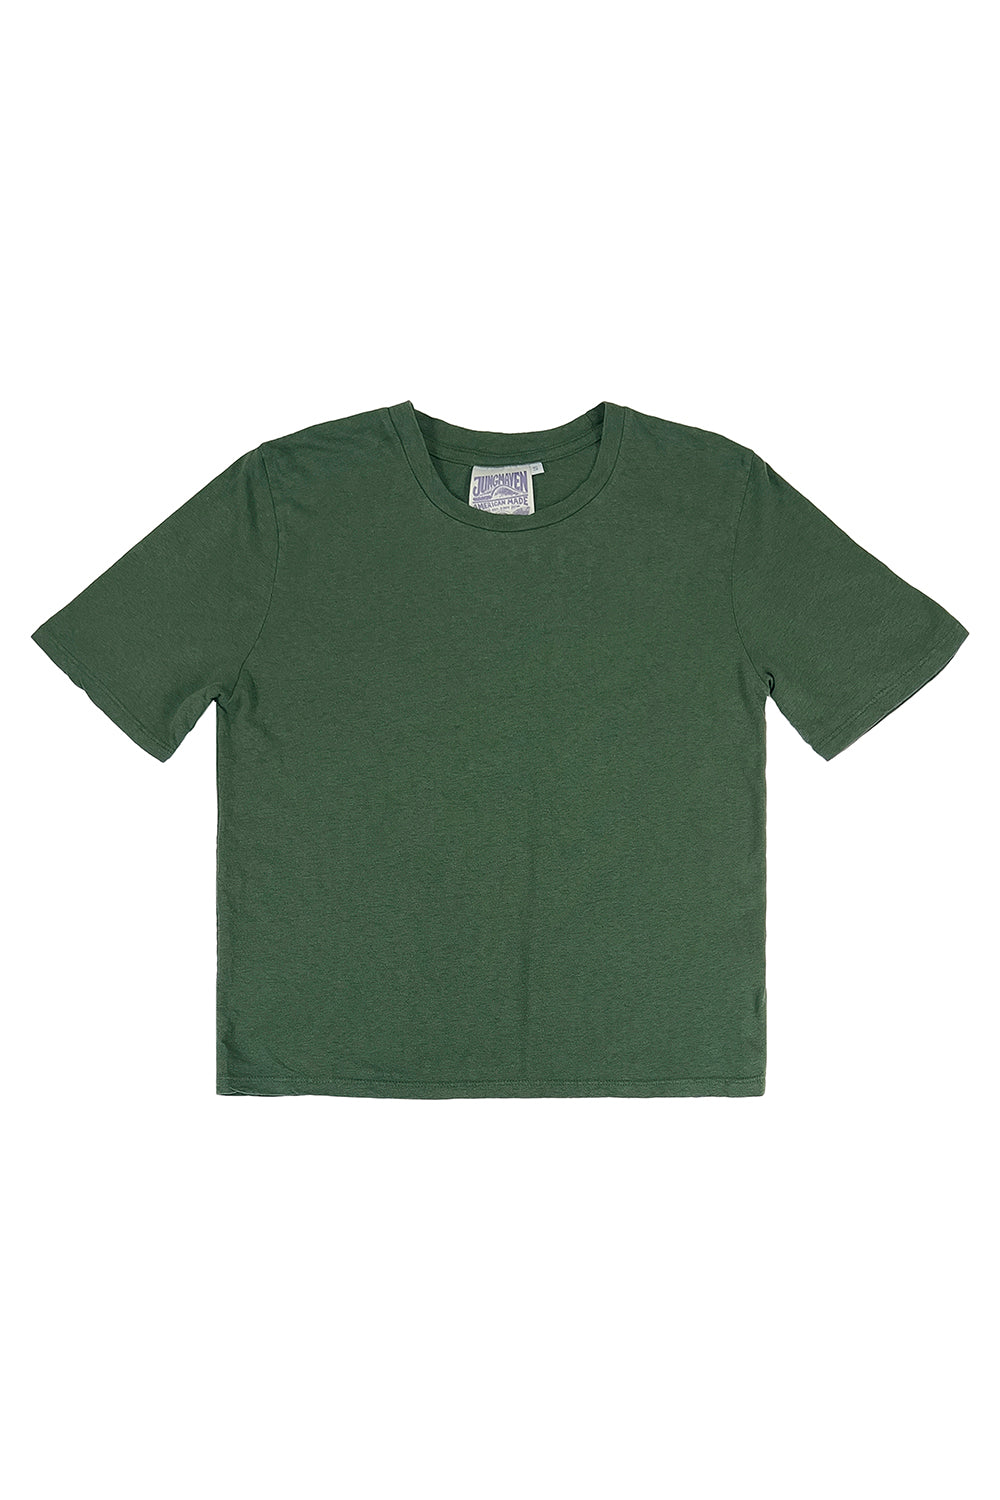 Silverlake Cropped Tee | Jungmaven Hemp Clothing & Accessories / Color: Hunter Green